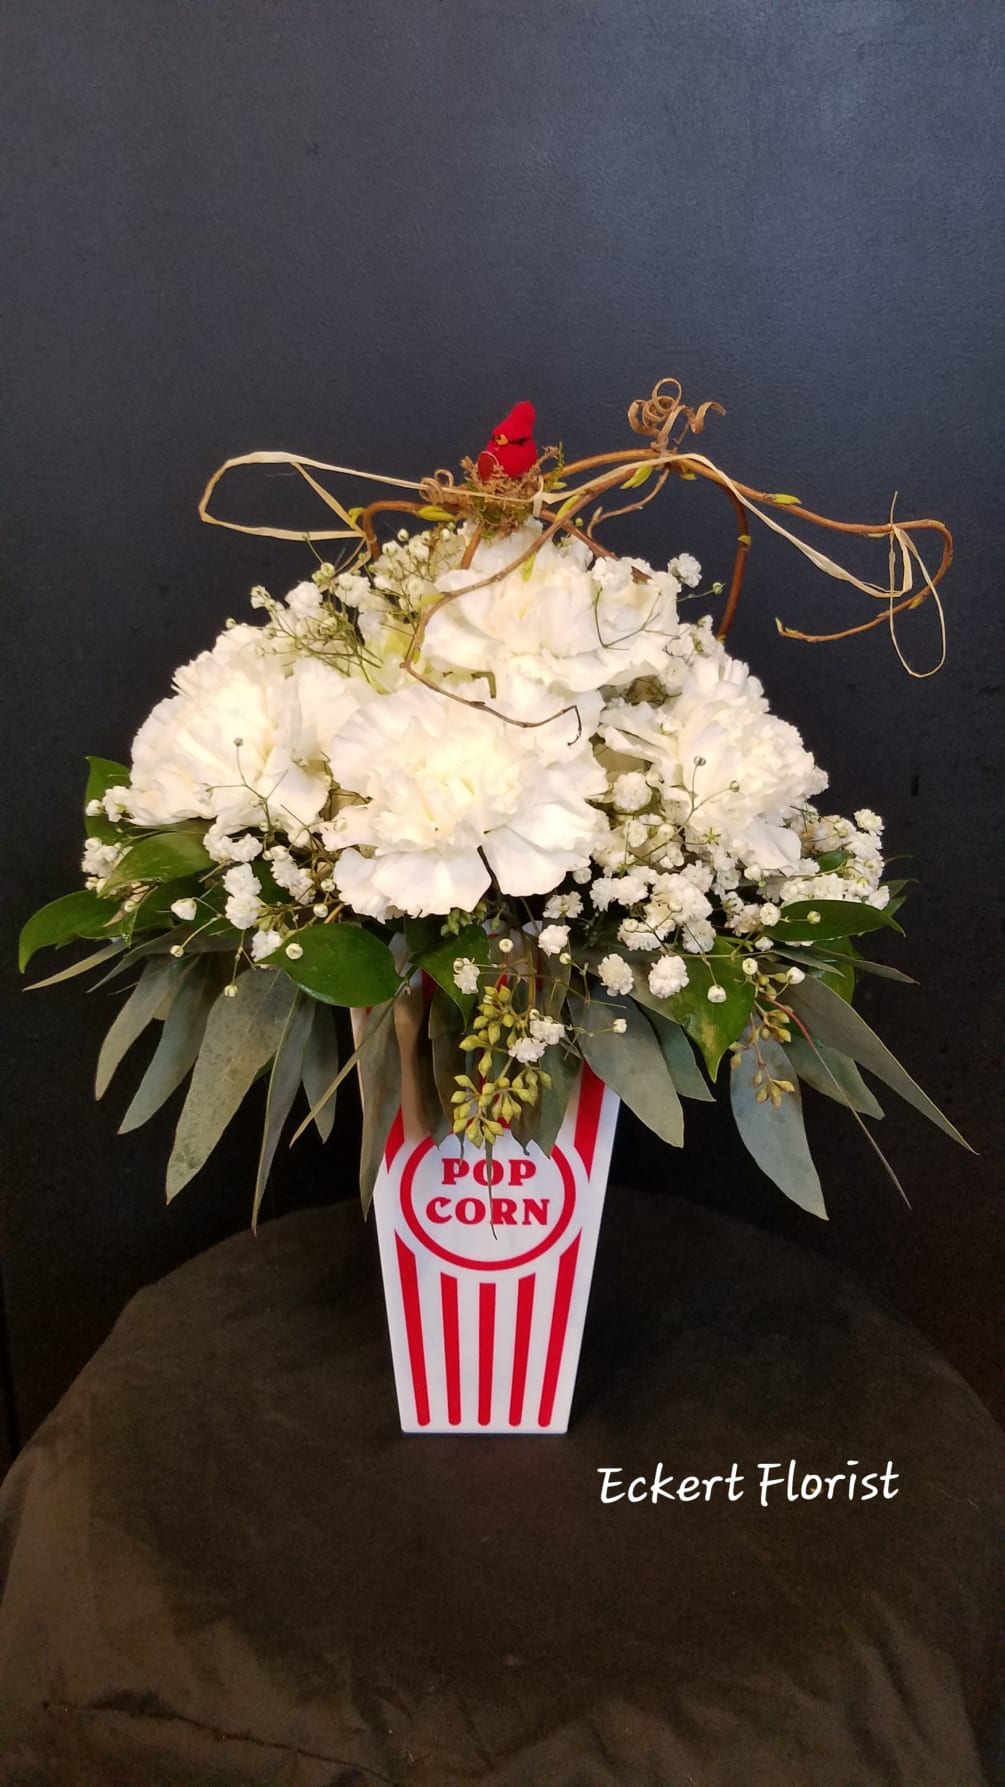 Arranged in a reusable popcorn box, this fresh bouquet is designed with